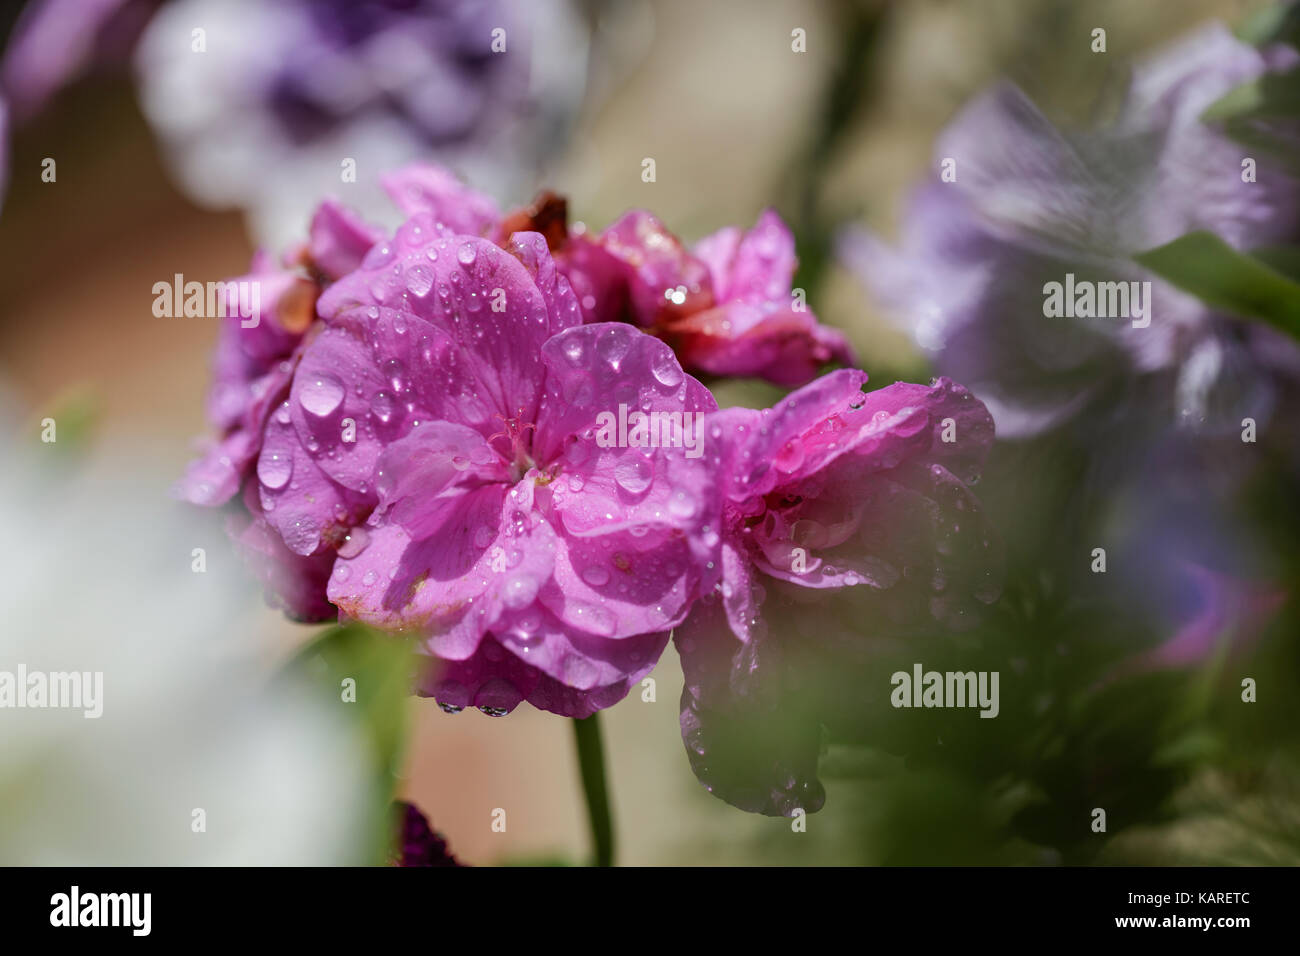 Close up of ivy leaf geranium with dew drops on pink petals Stock Photo